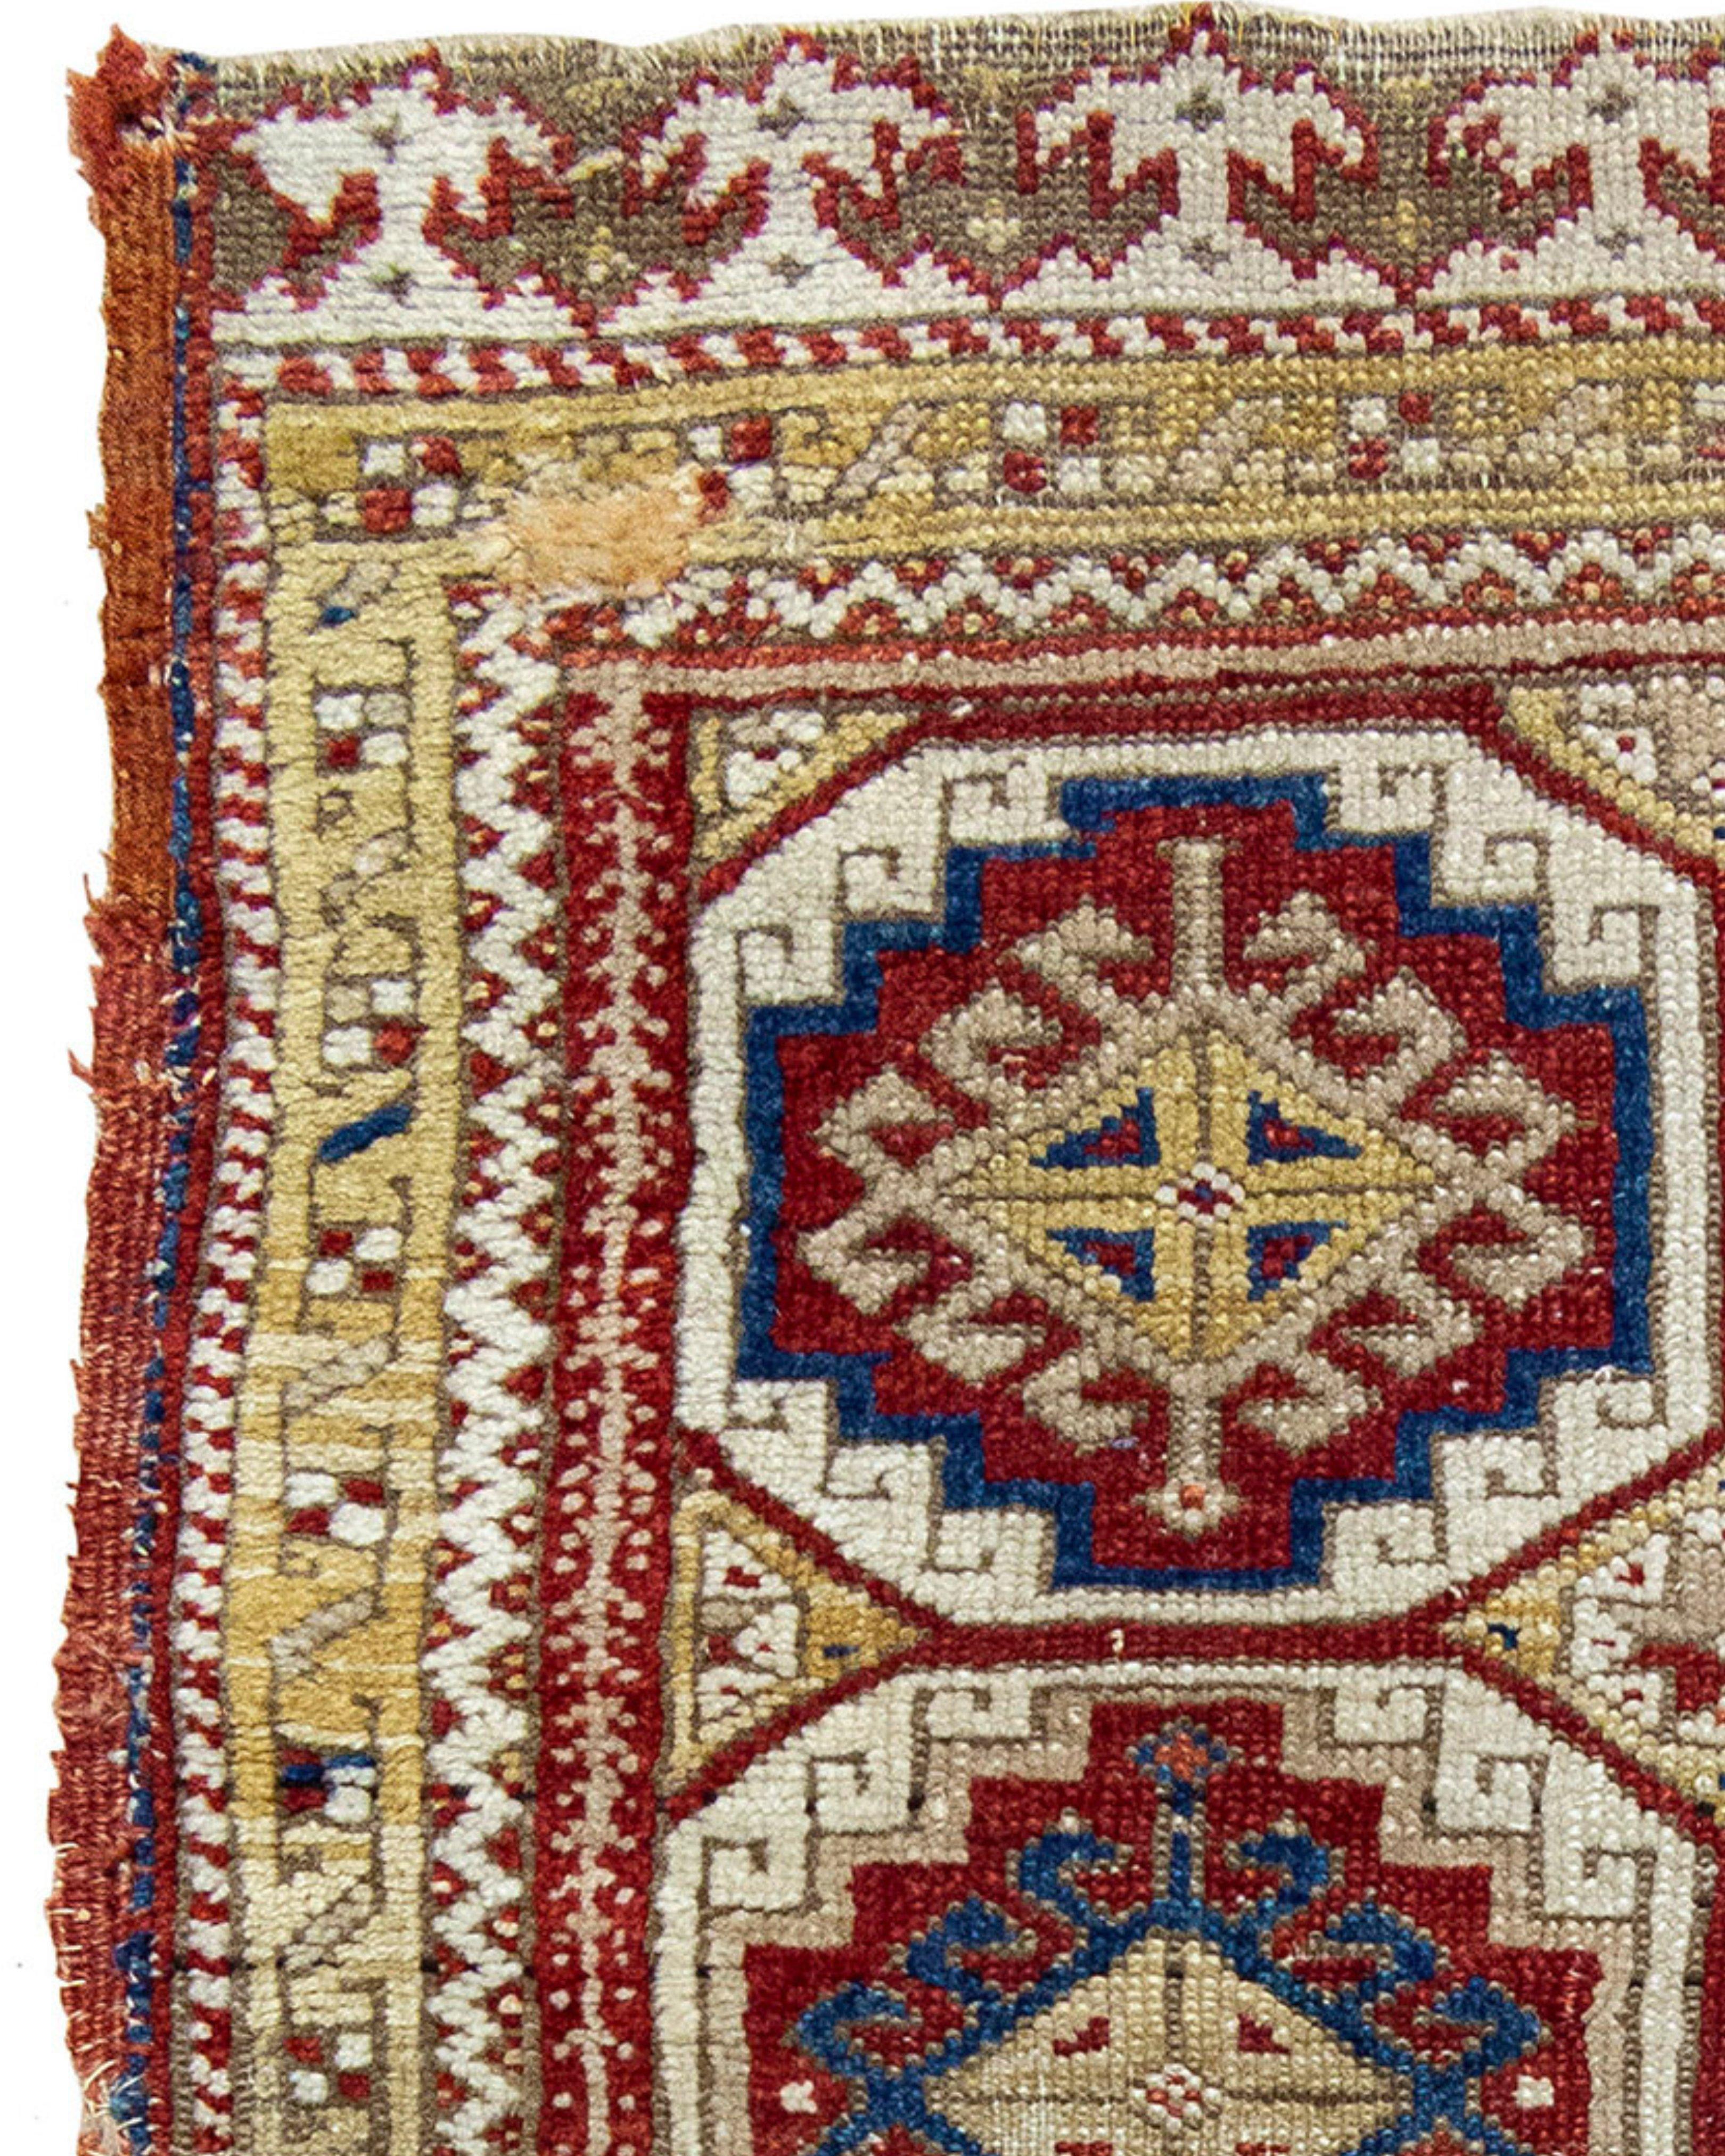 Antique Turkish Konya Yastik Rug, Mid-19th century In Good Condition For Sale In San Francisco, CA